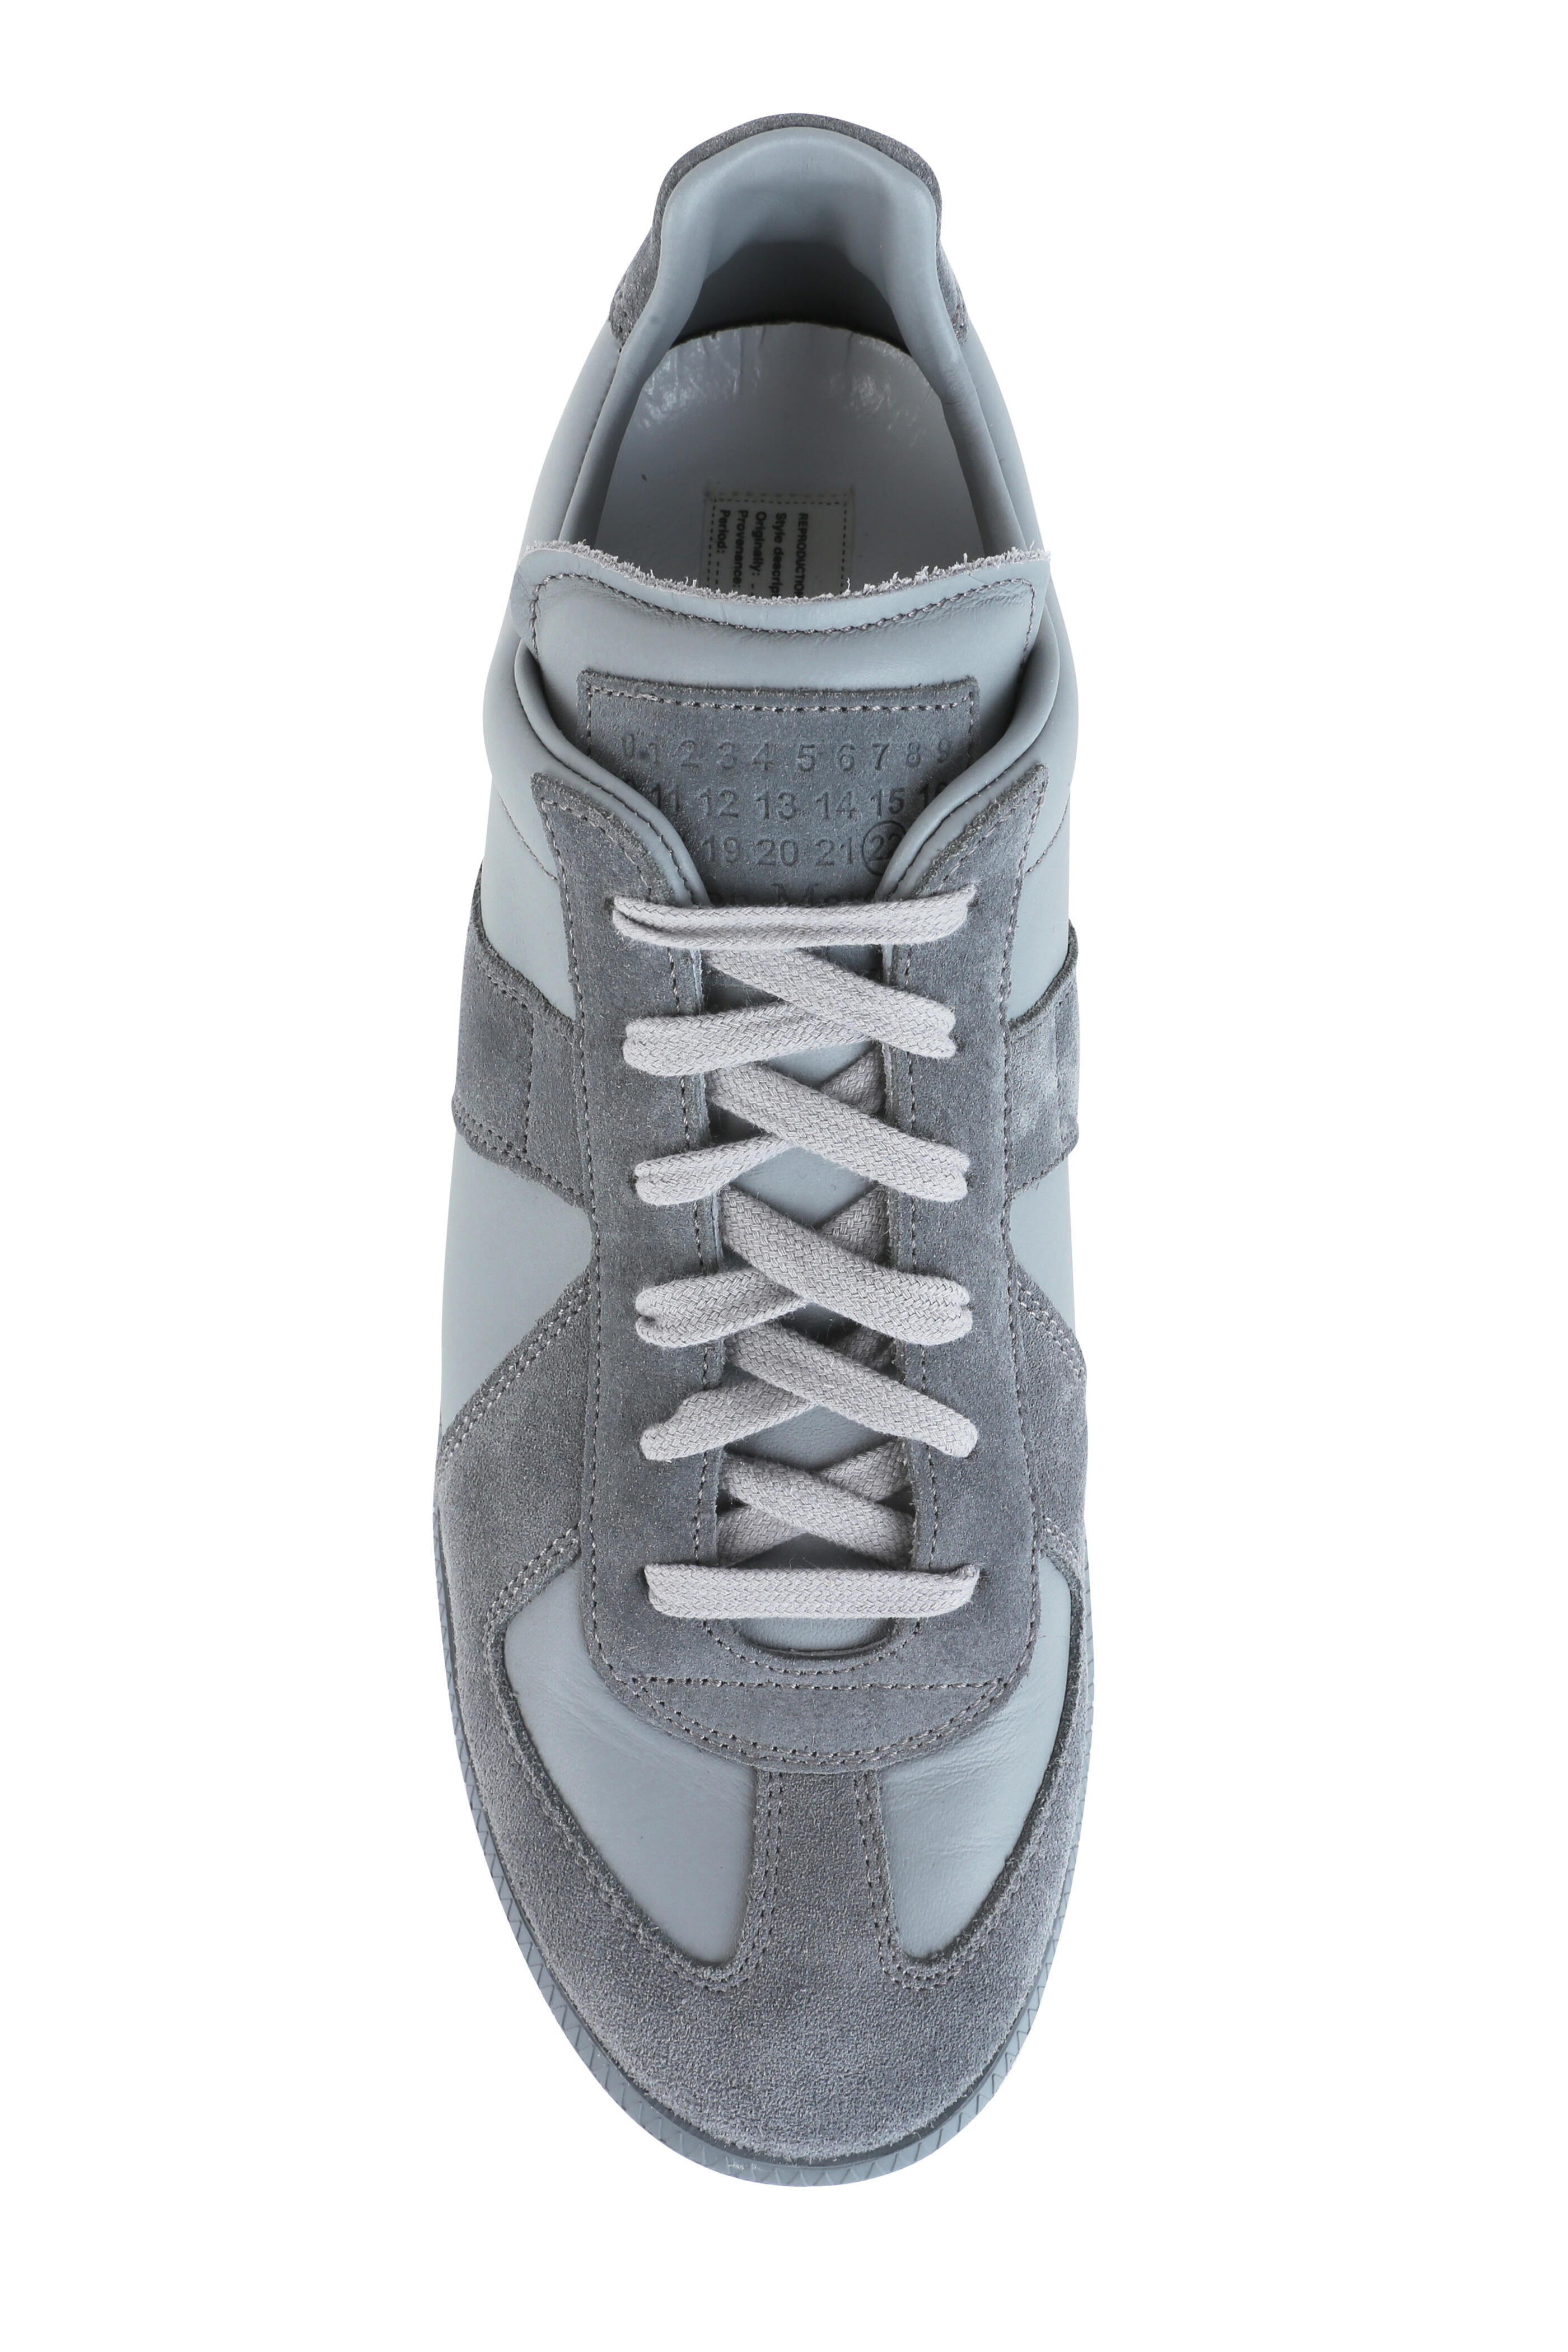 Maison Margiela - Replica Gray Leather & Suede Lace-Up Sneaker